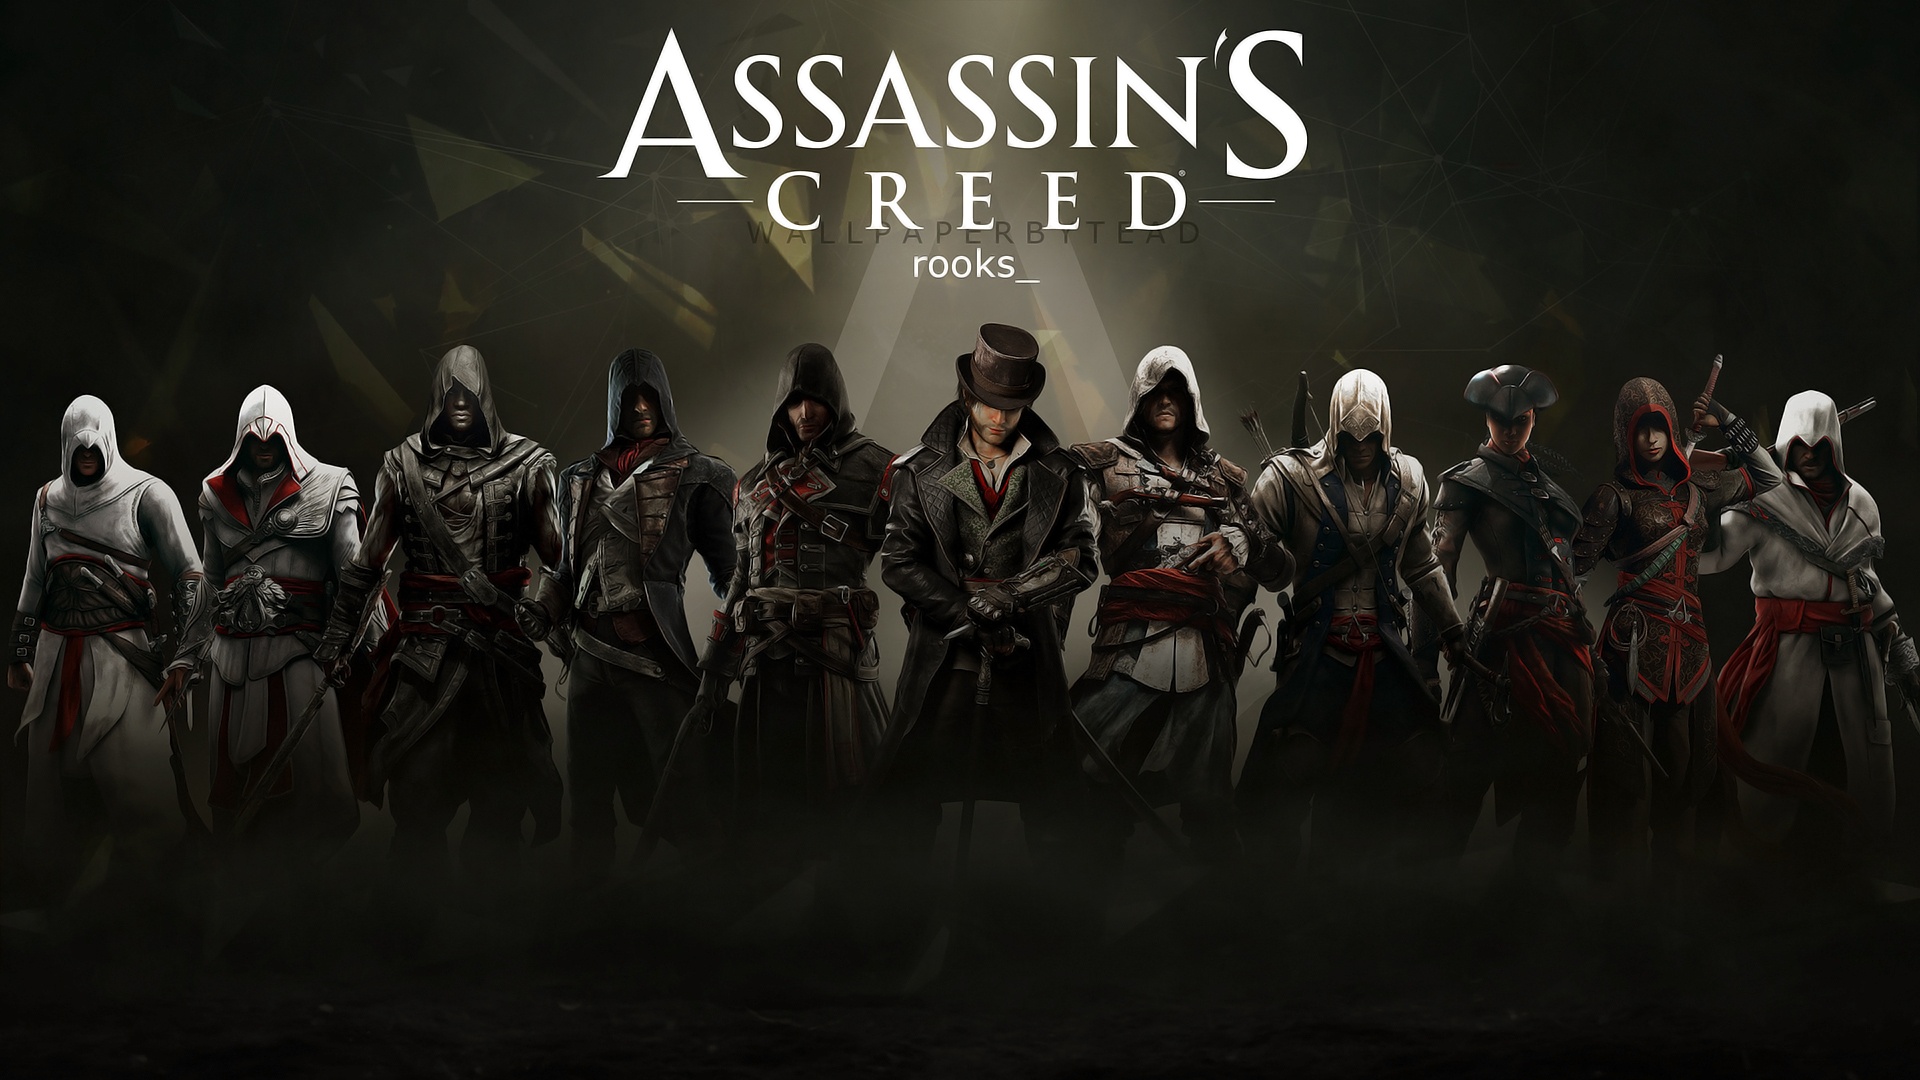 Assassin's Creed: Syndicate HD wallpapers free download